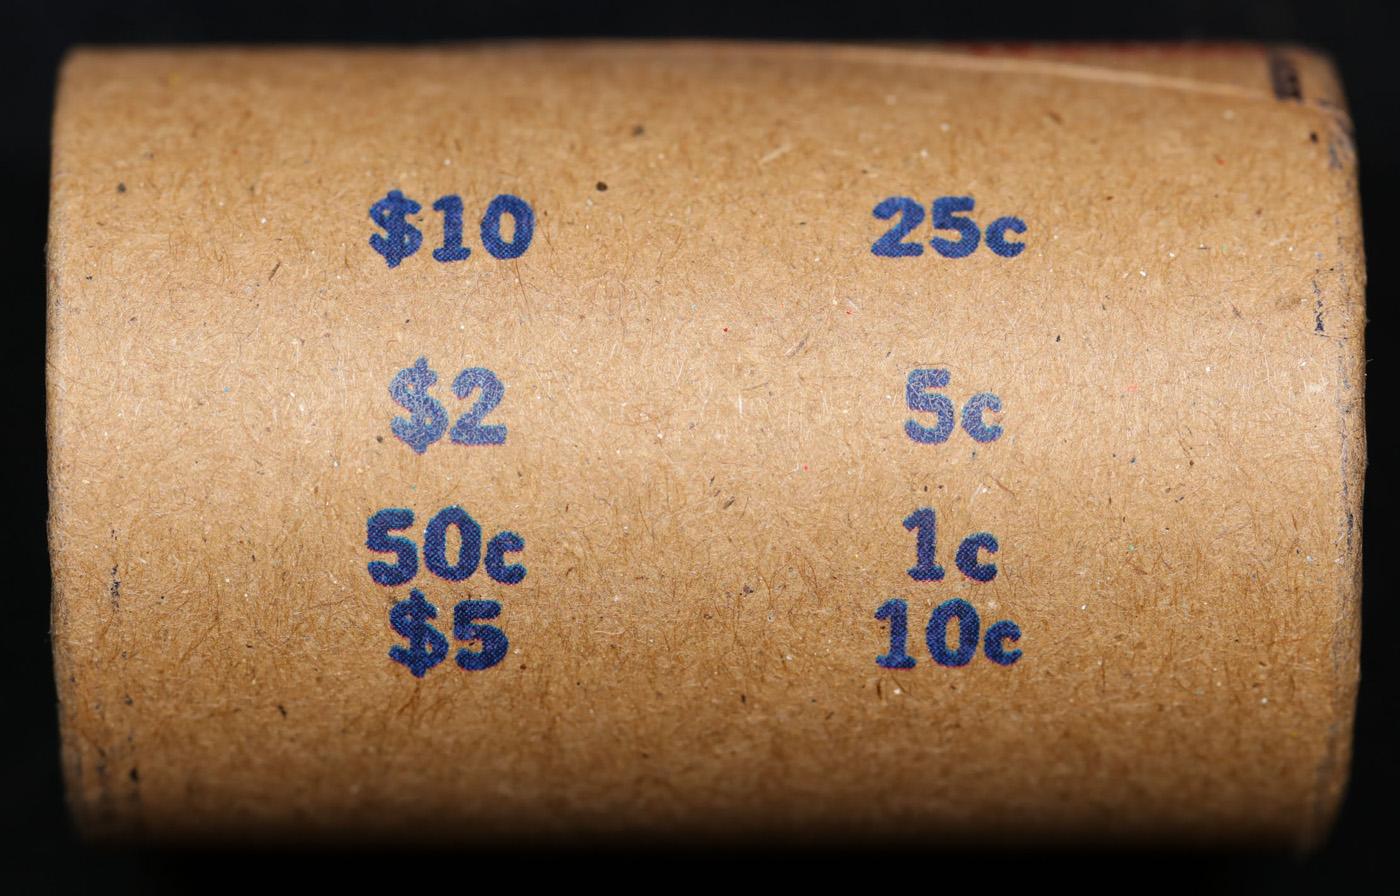 *EXCLUSIVE* Hand Marked "Unc Peace Limited," x20 coin Covered End Roll! - Huge Vault Hoard  (FC)